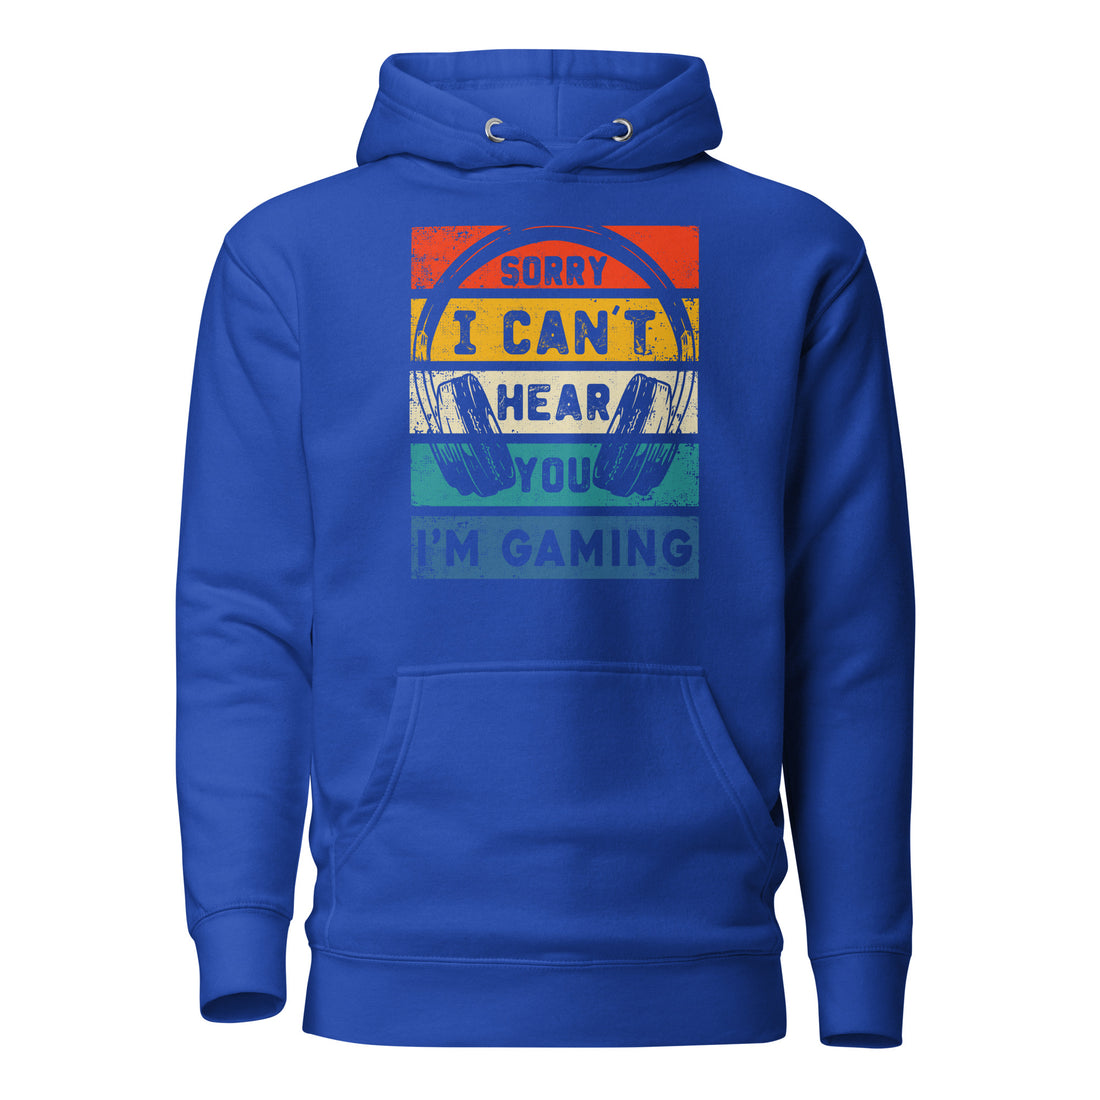 Hoodie - I Can´t Hear i´m Gaming